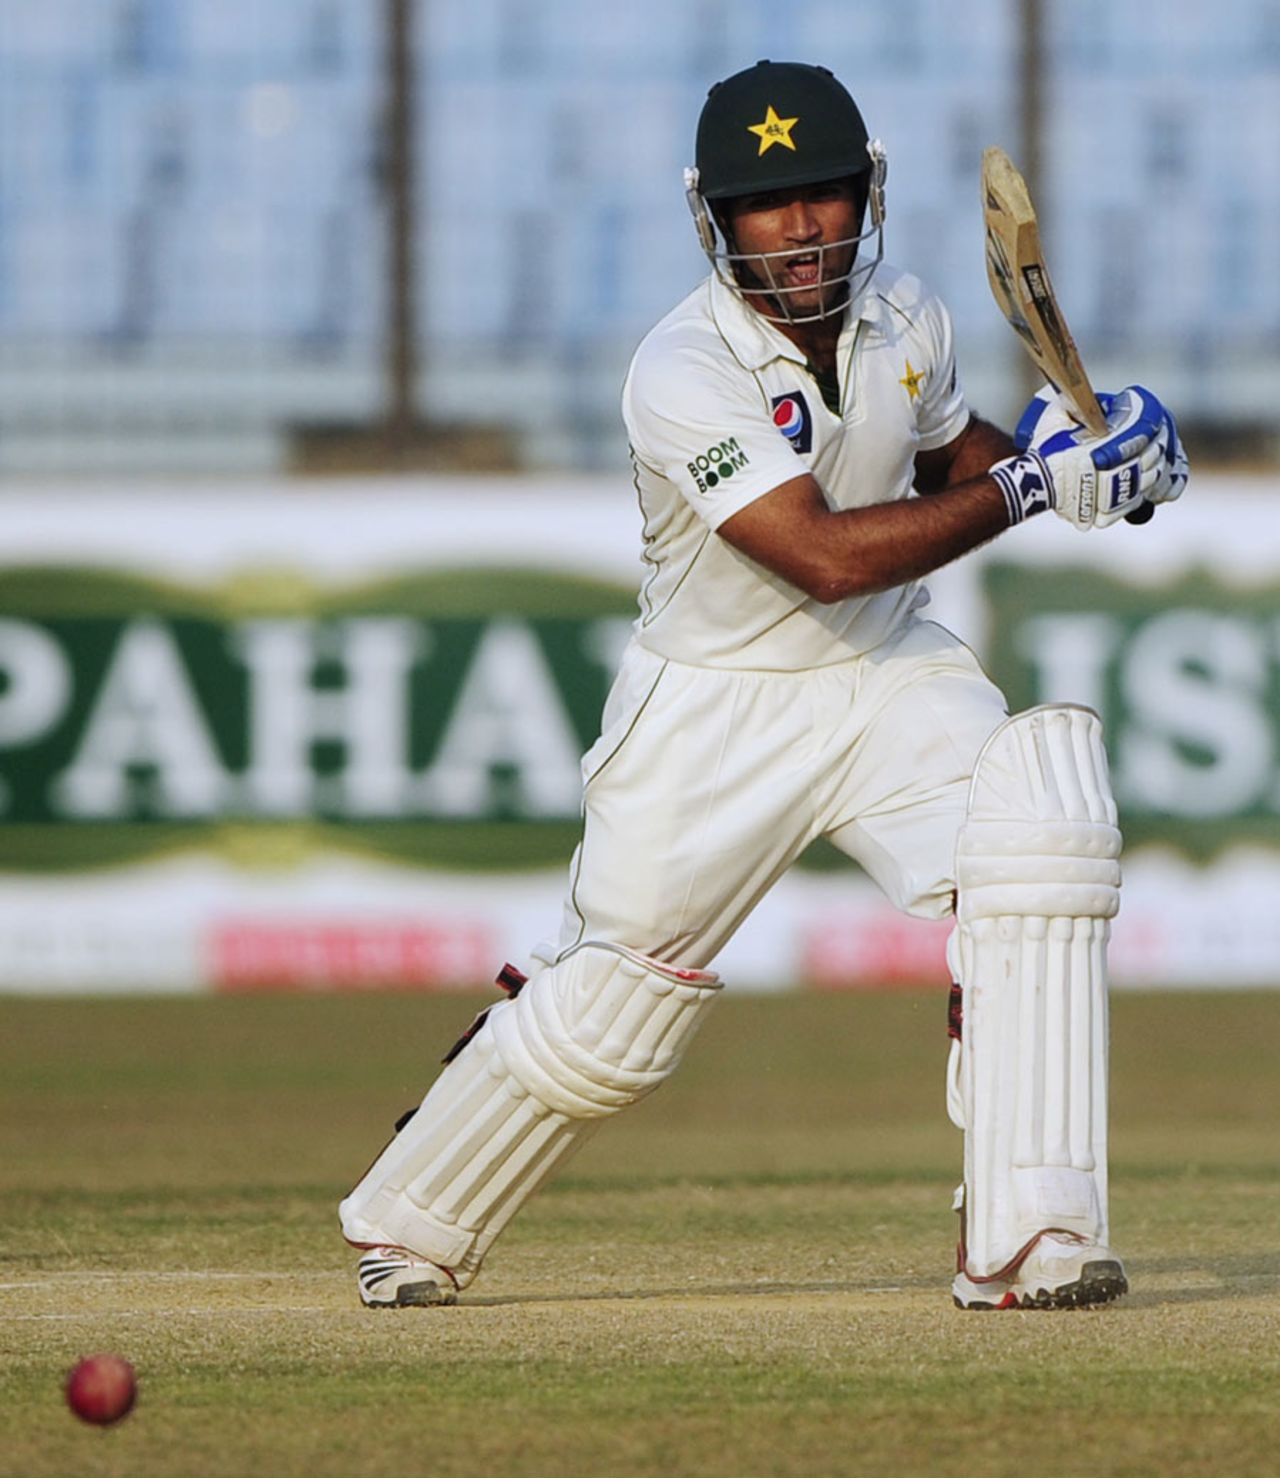 Asad Shafiq ended the day unbeaten on 40, Bangladesh v Pakistan, 1st Test, Chittagong, 2nd day, December 10, 2011 